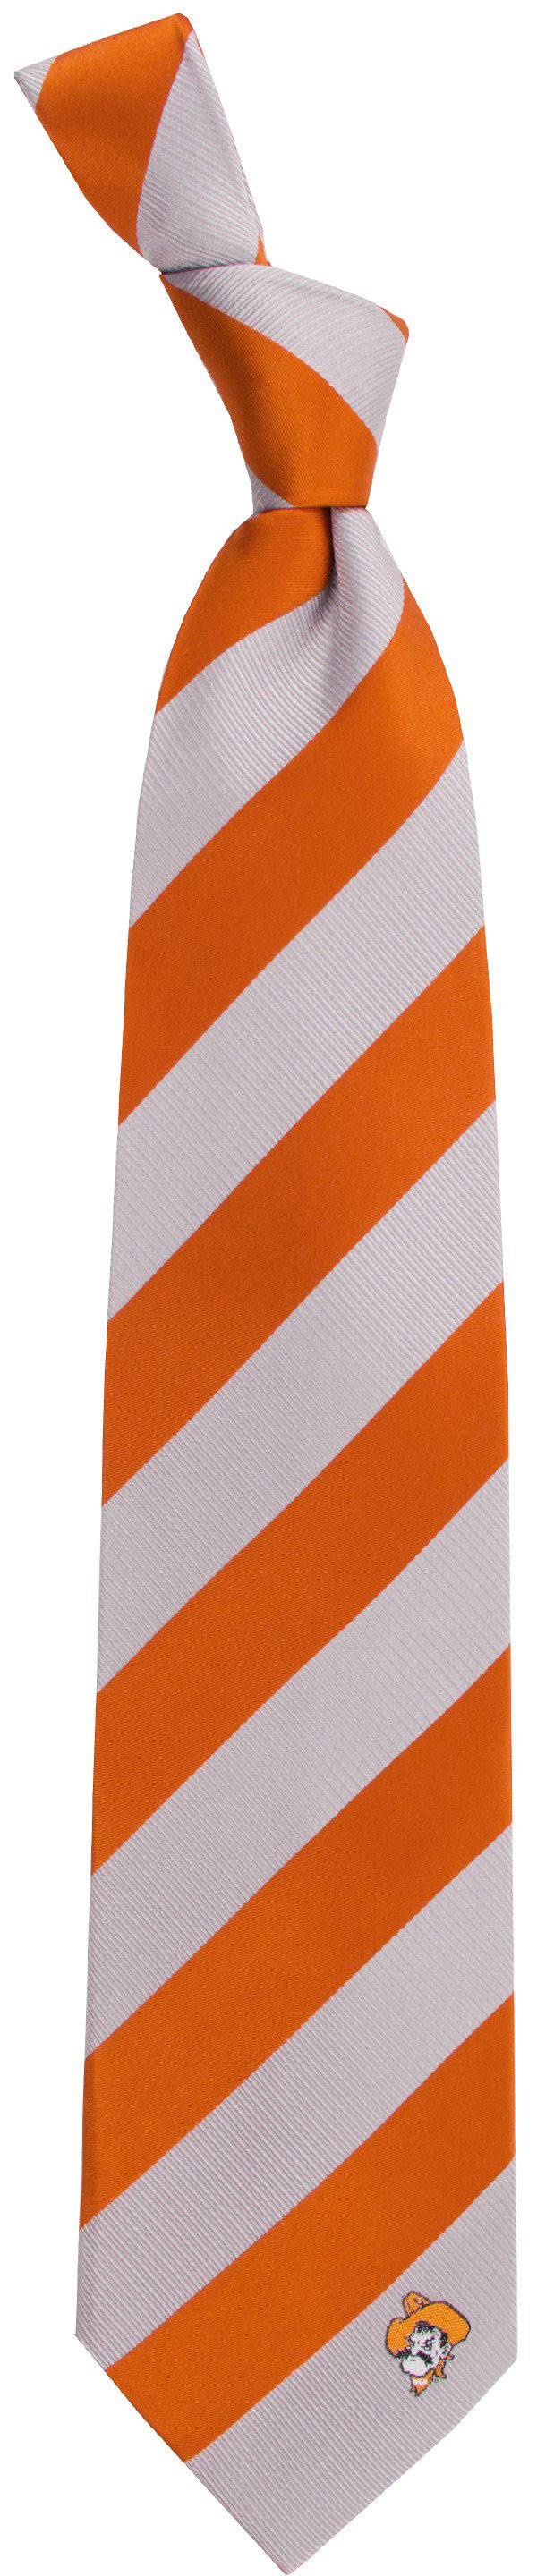 Eagles Wings Oklahoma State Cowboys Woven Silk Necktie product image